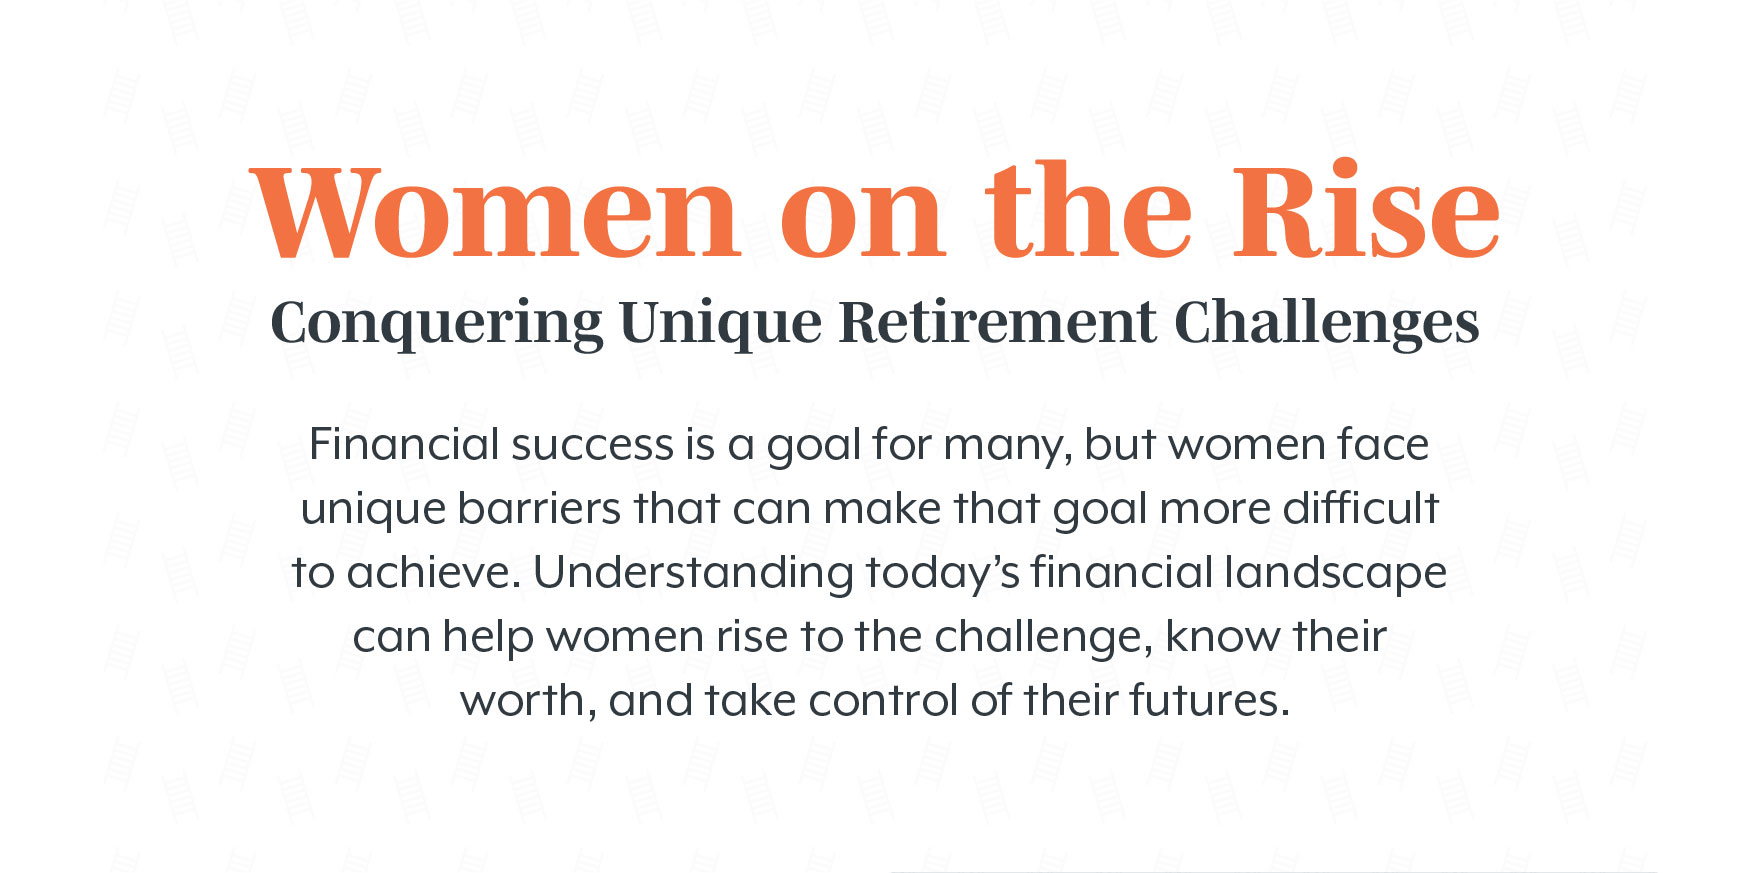 Women on the Rise Conquering: Unique Retirement Challenges. Financial success is a goal for many, but women face unique barriers that can make that goal more difficult to achieve. Understanding today’s financial landscape can help women rise to the challenge, know their worth, and take control of their futures.